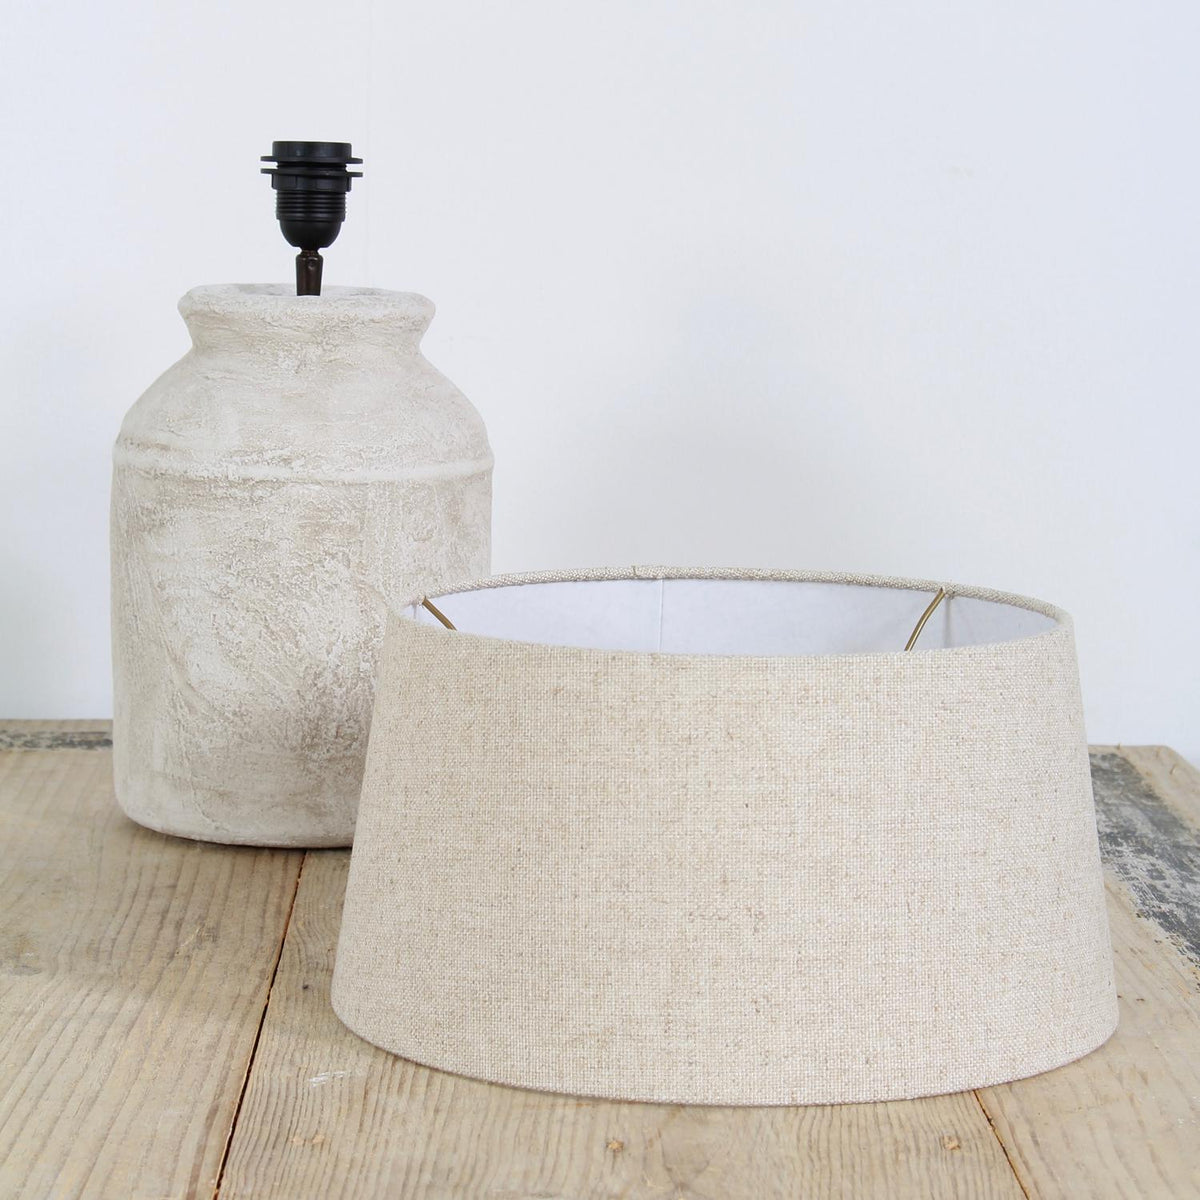 Pair of Stylish Ceramic Lamps with Belgian Linen Shades